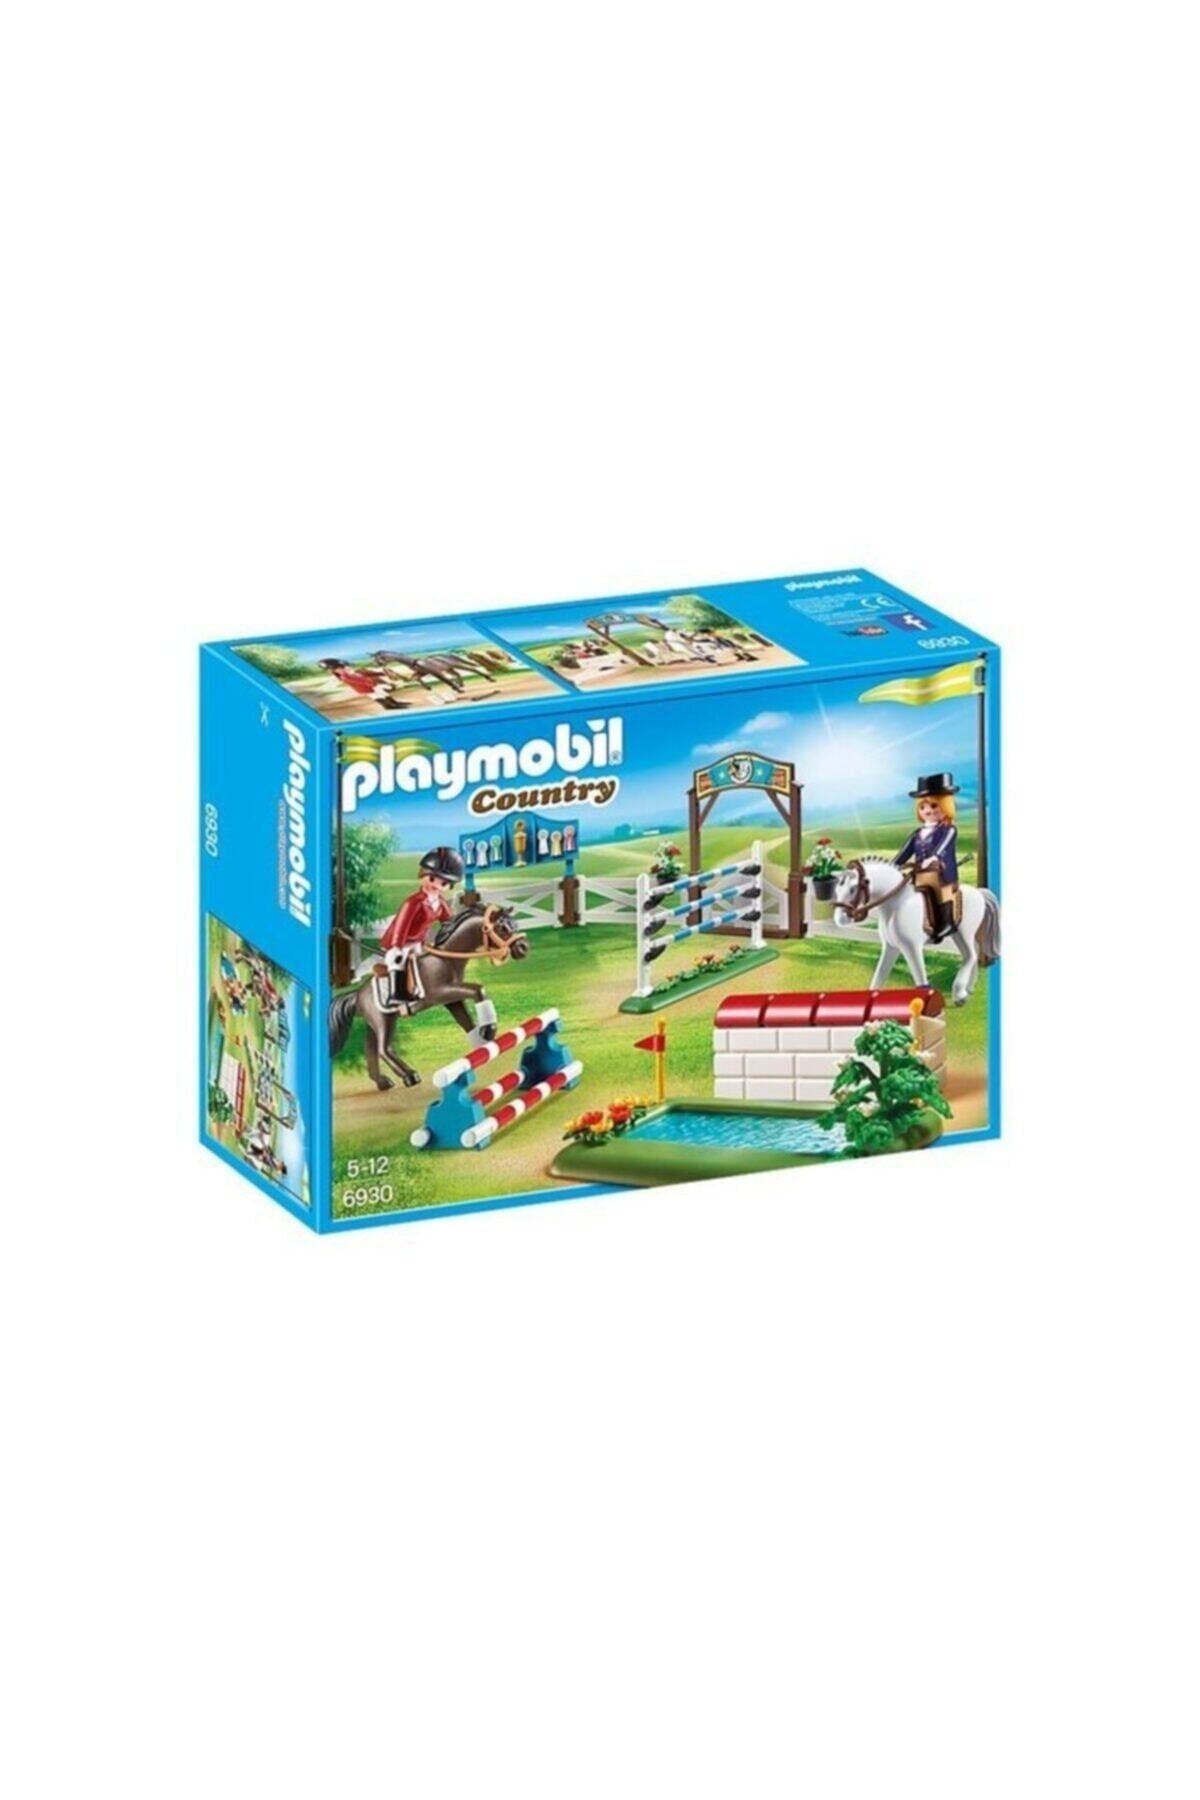 Playmobil Country Horse Show 6930